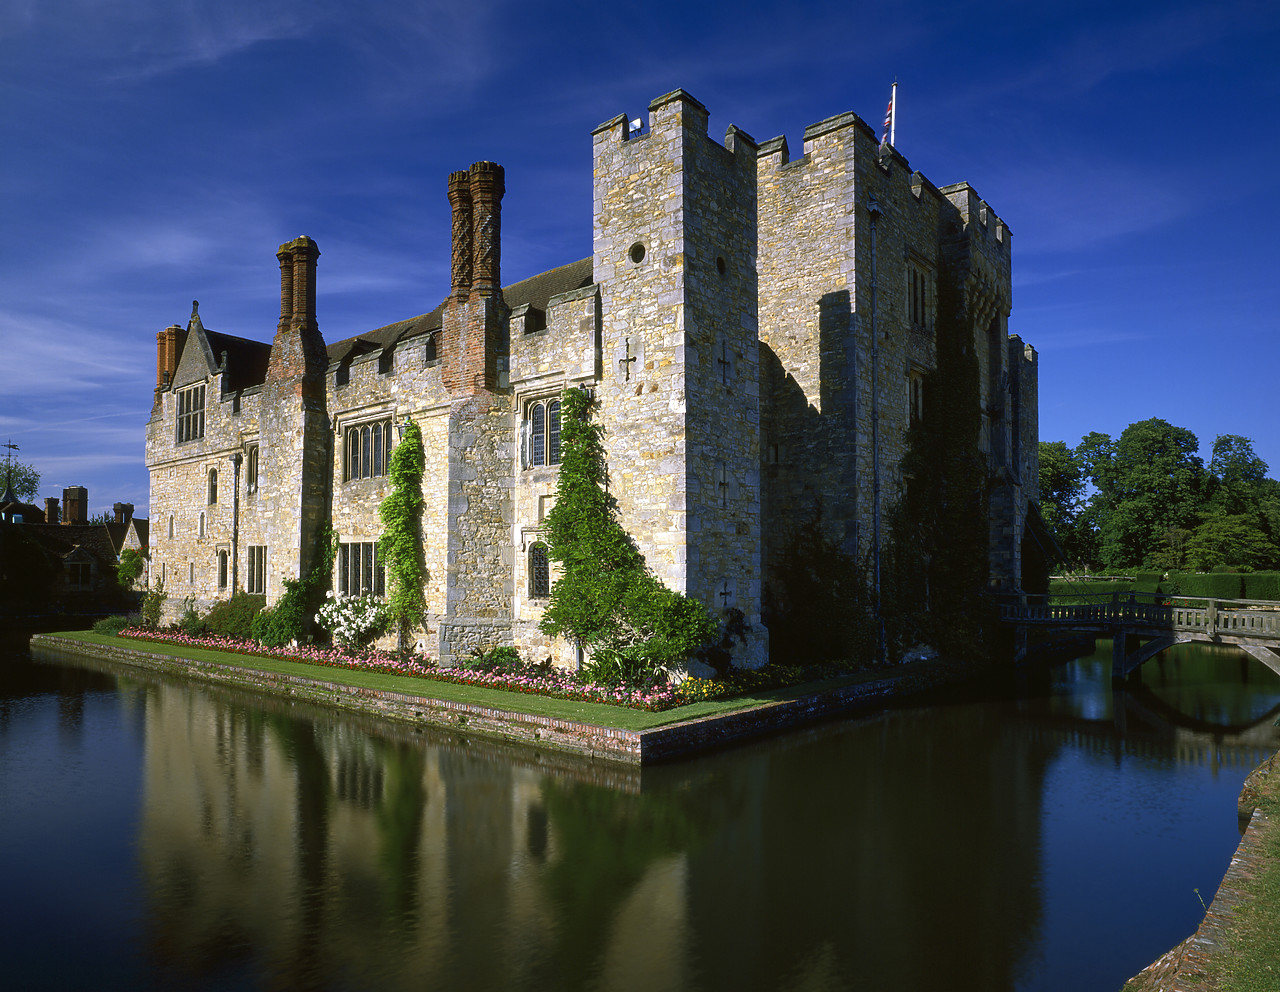 #902960-1 - Hever Castle Reflecting in Moat, Hever, Kent, England